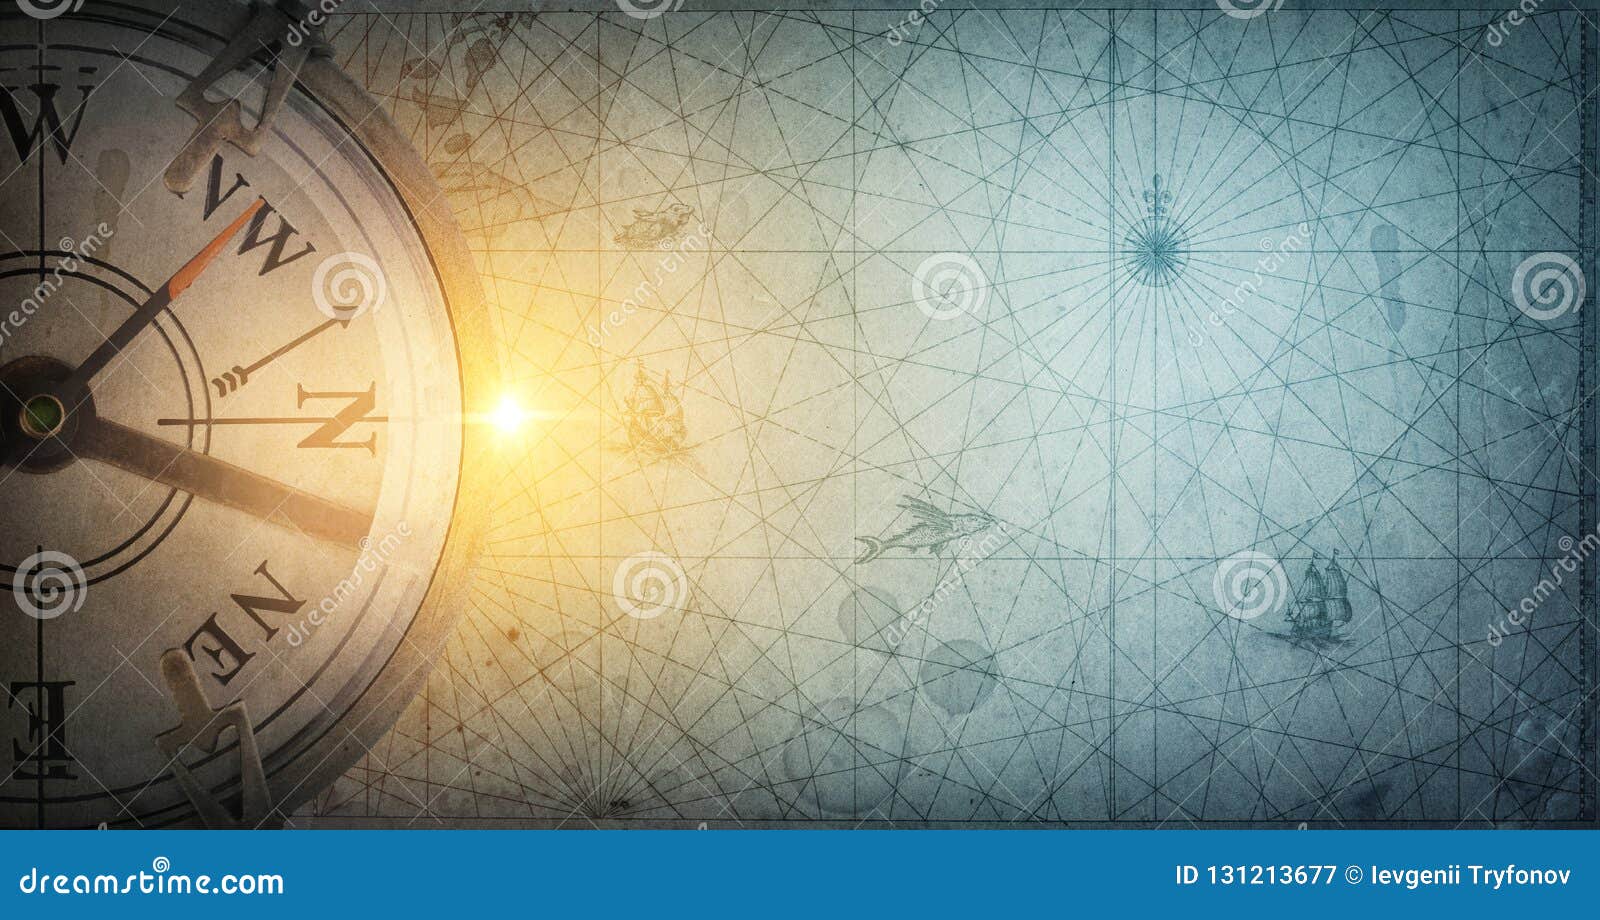 old sea compass on abstract map background. pirate and nautical